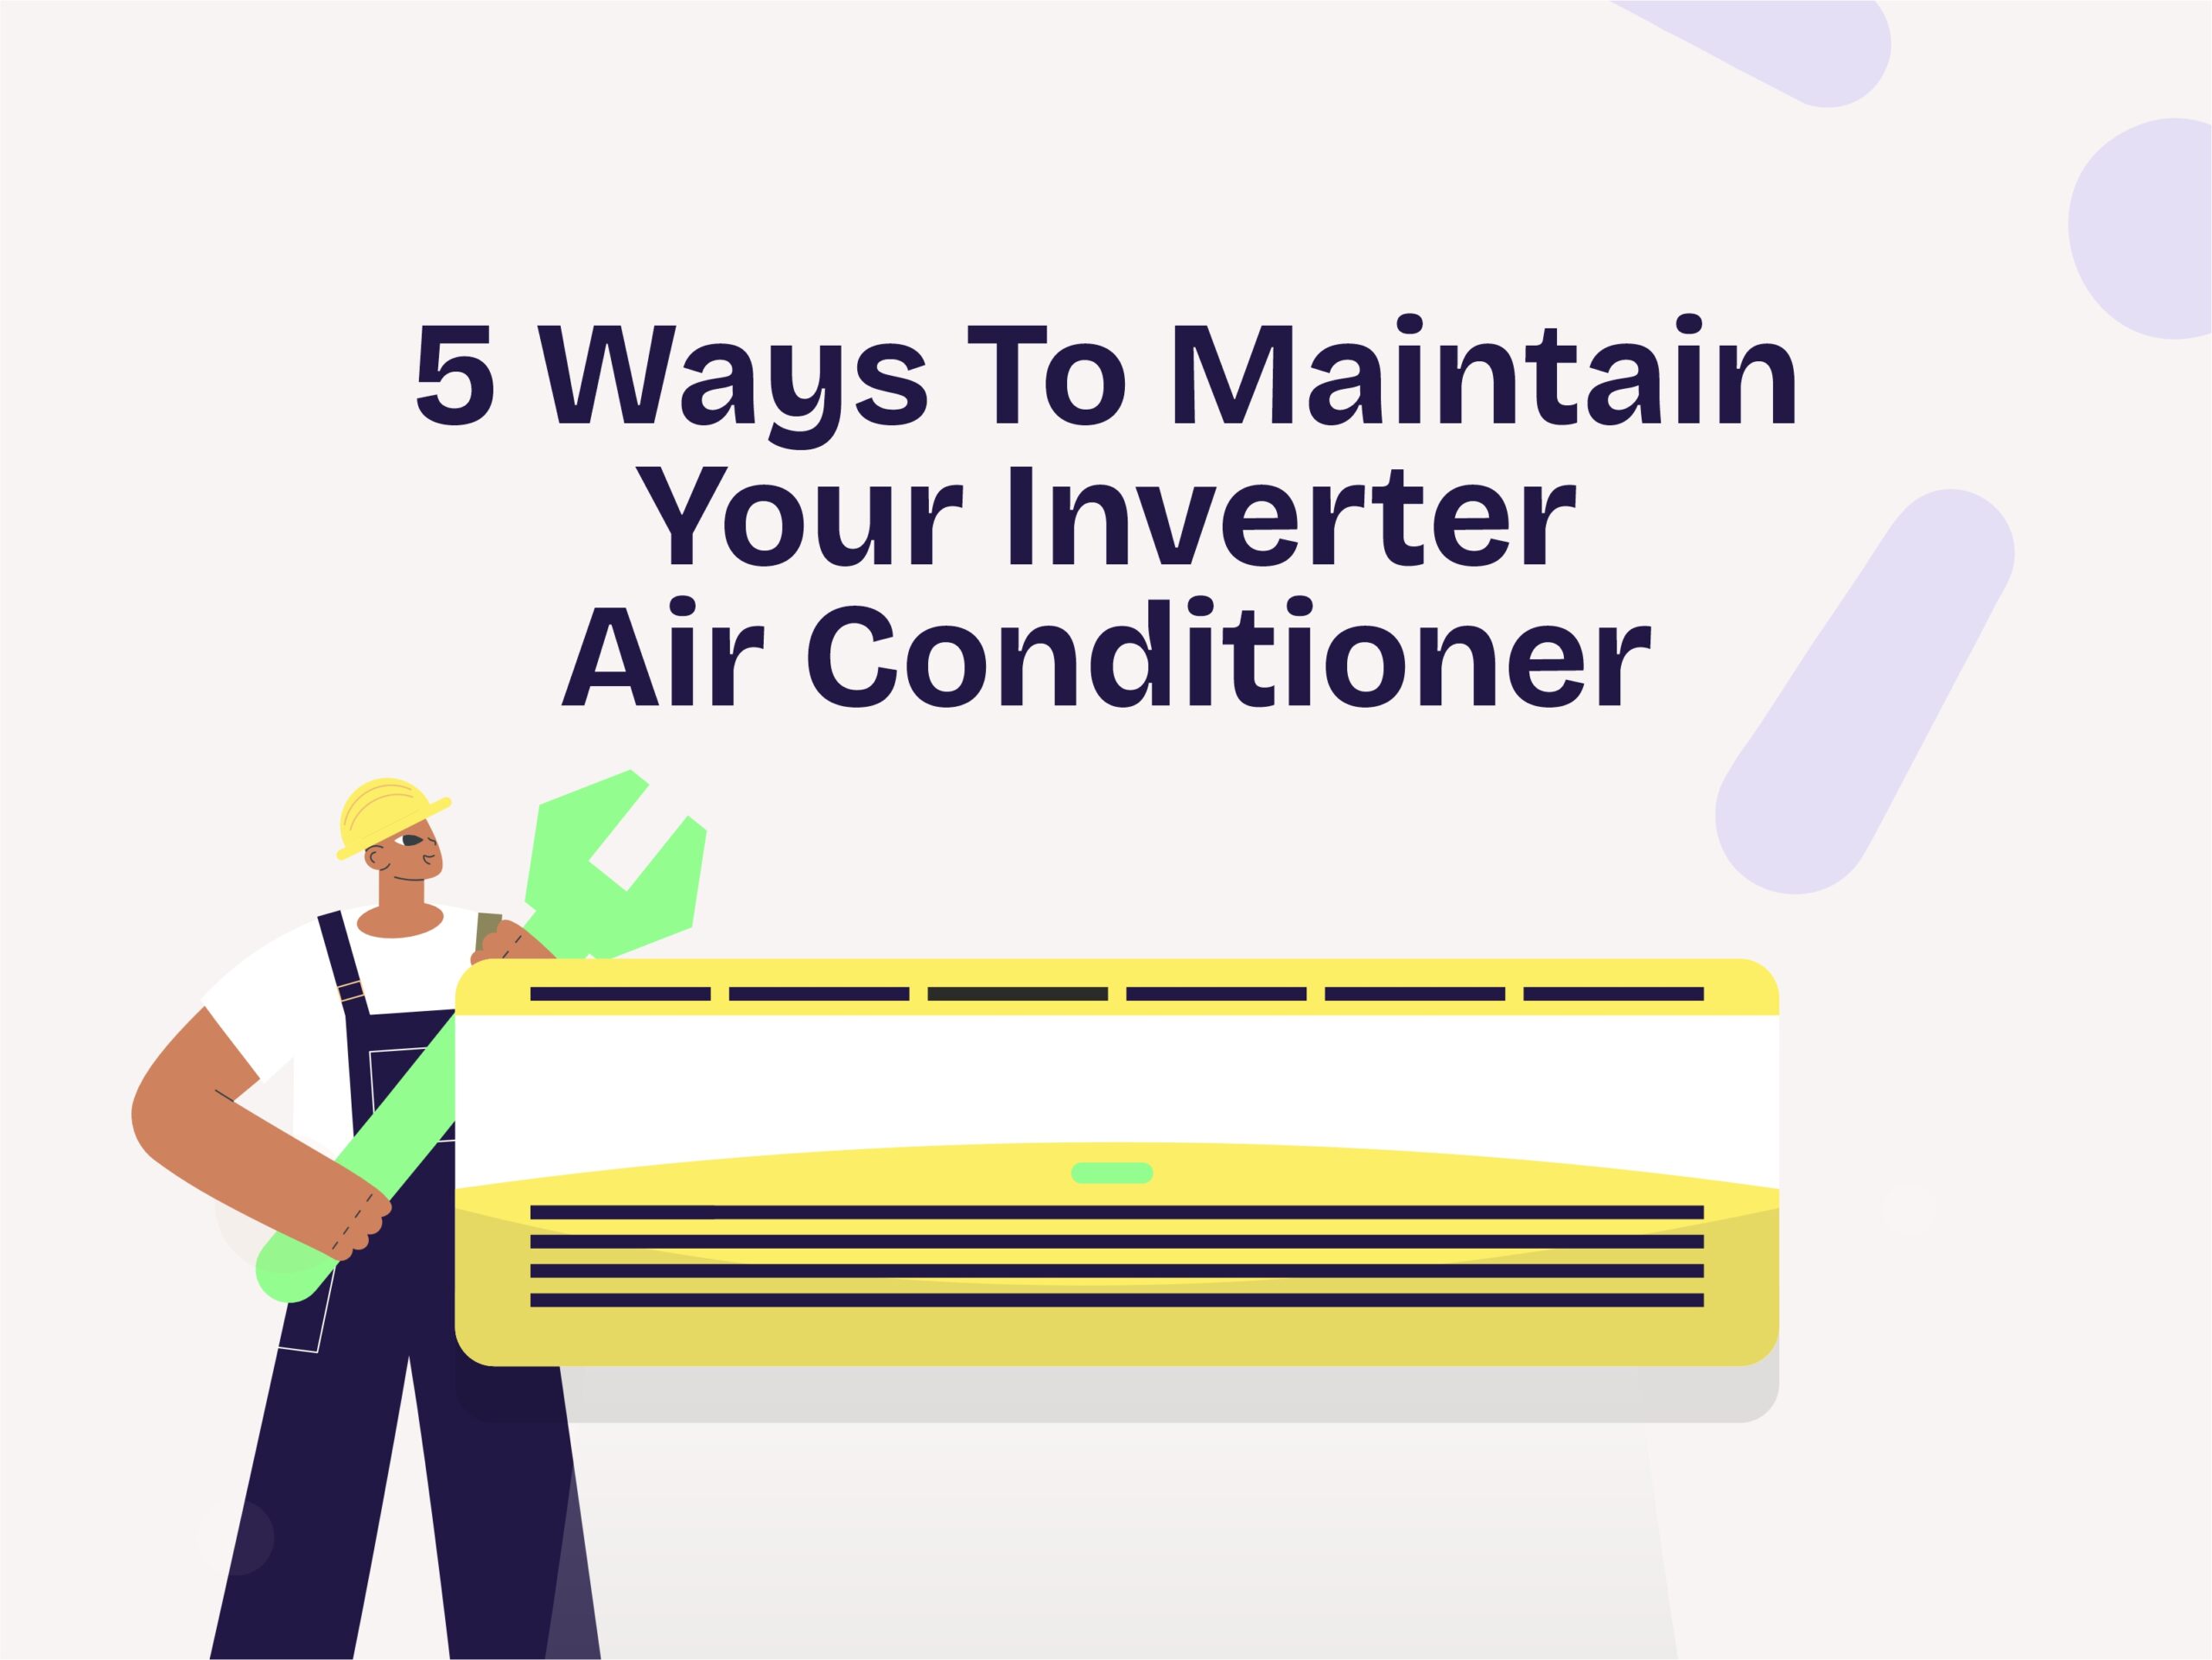 5 Ways To Maintain Your Inverter Air Conditioner